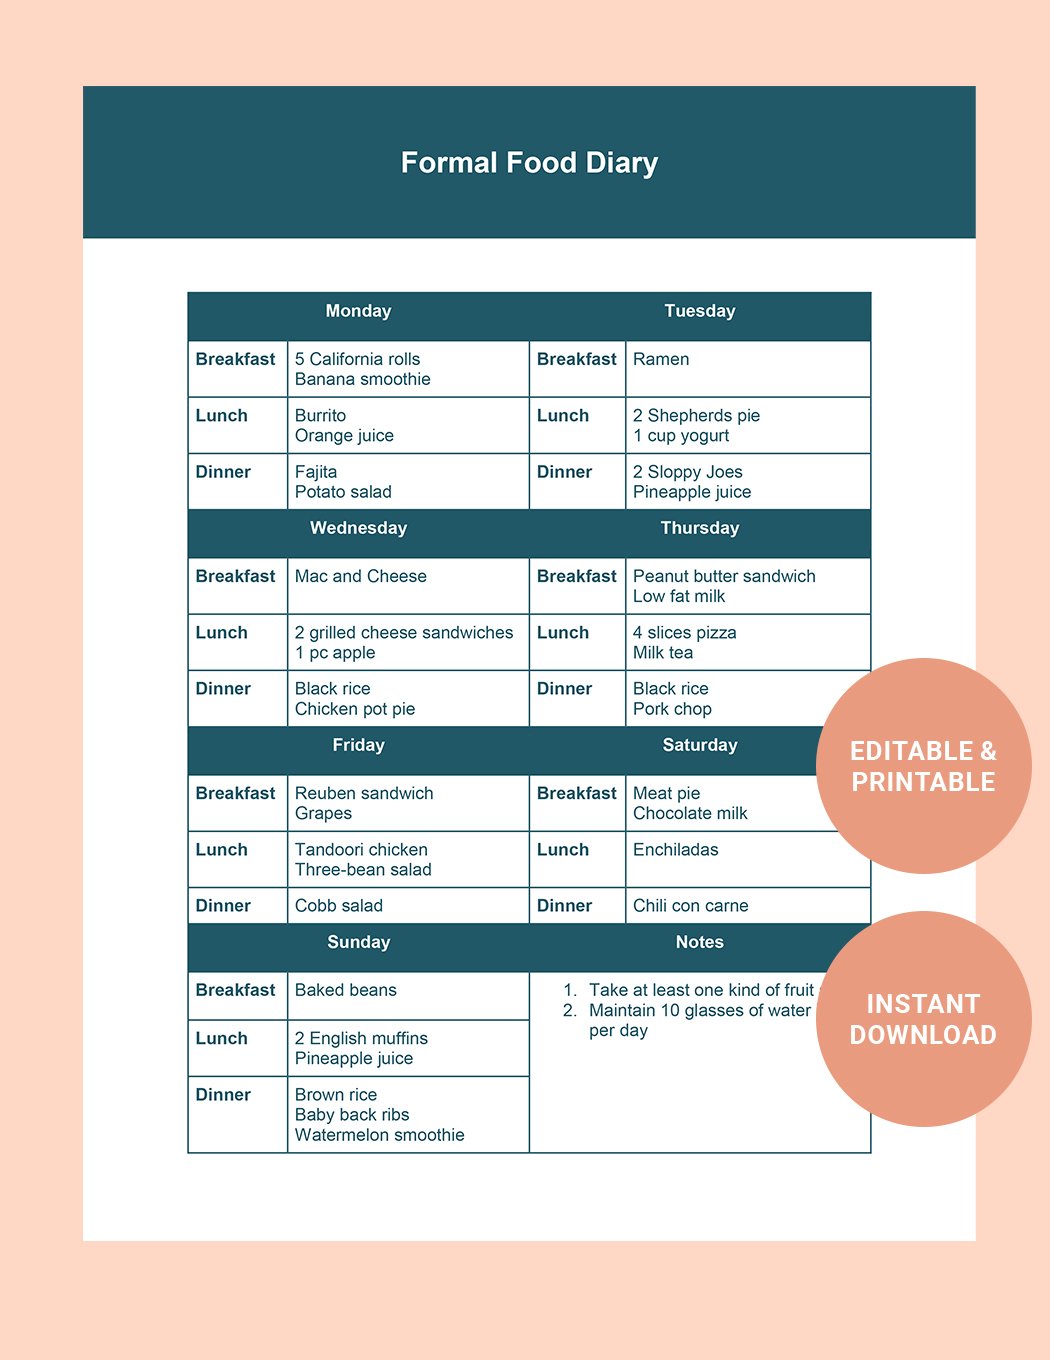 Free Formal Food Diary Template